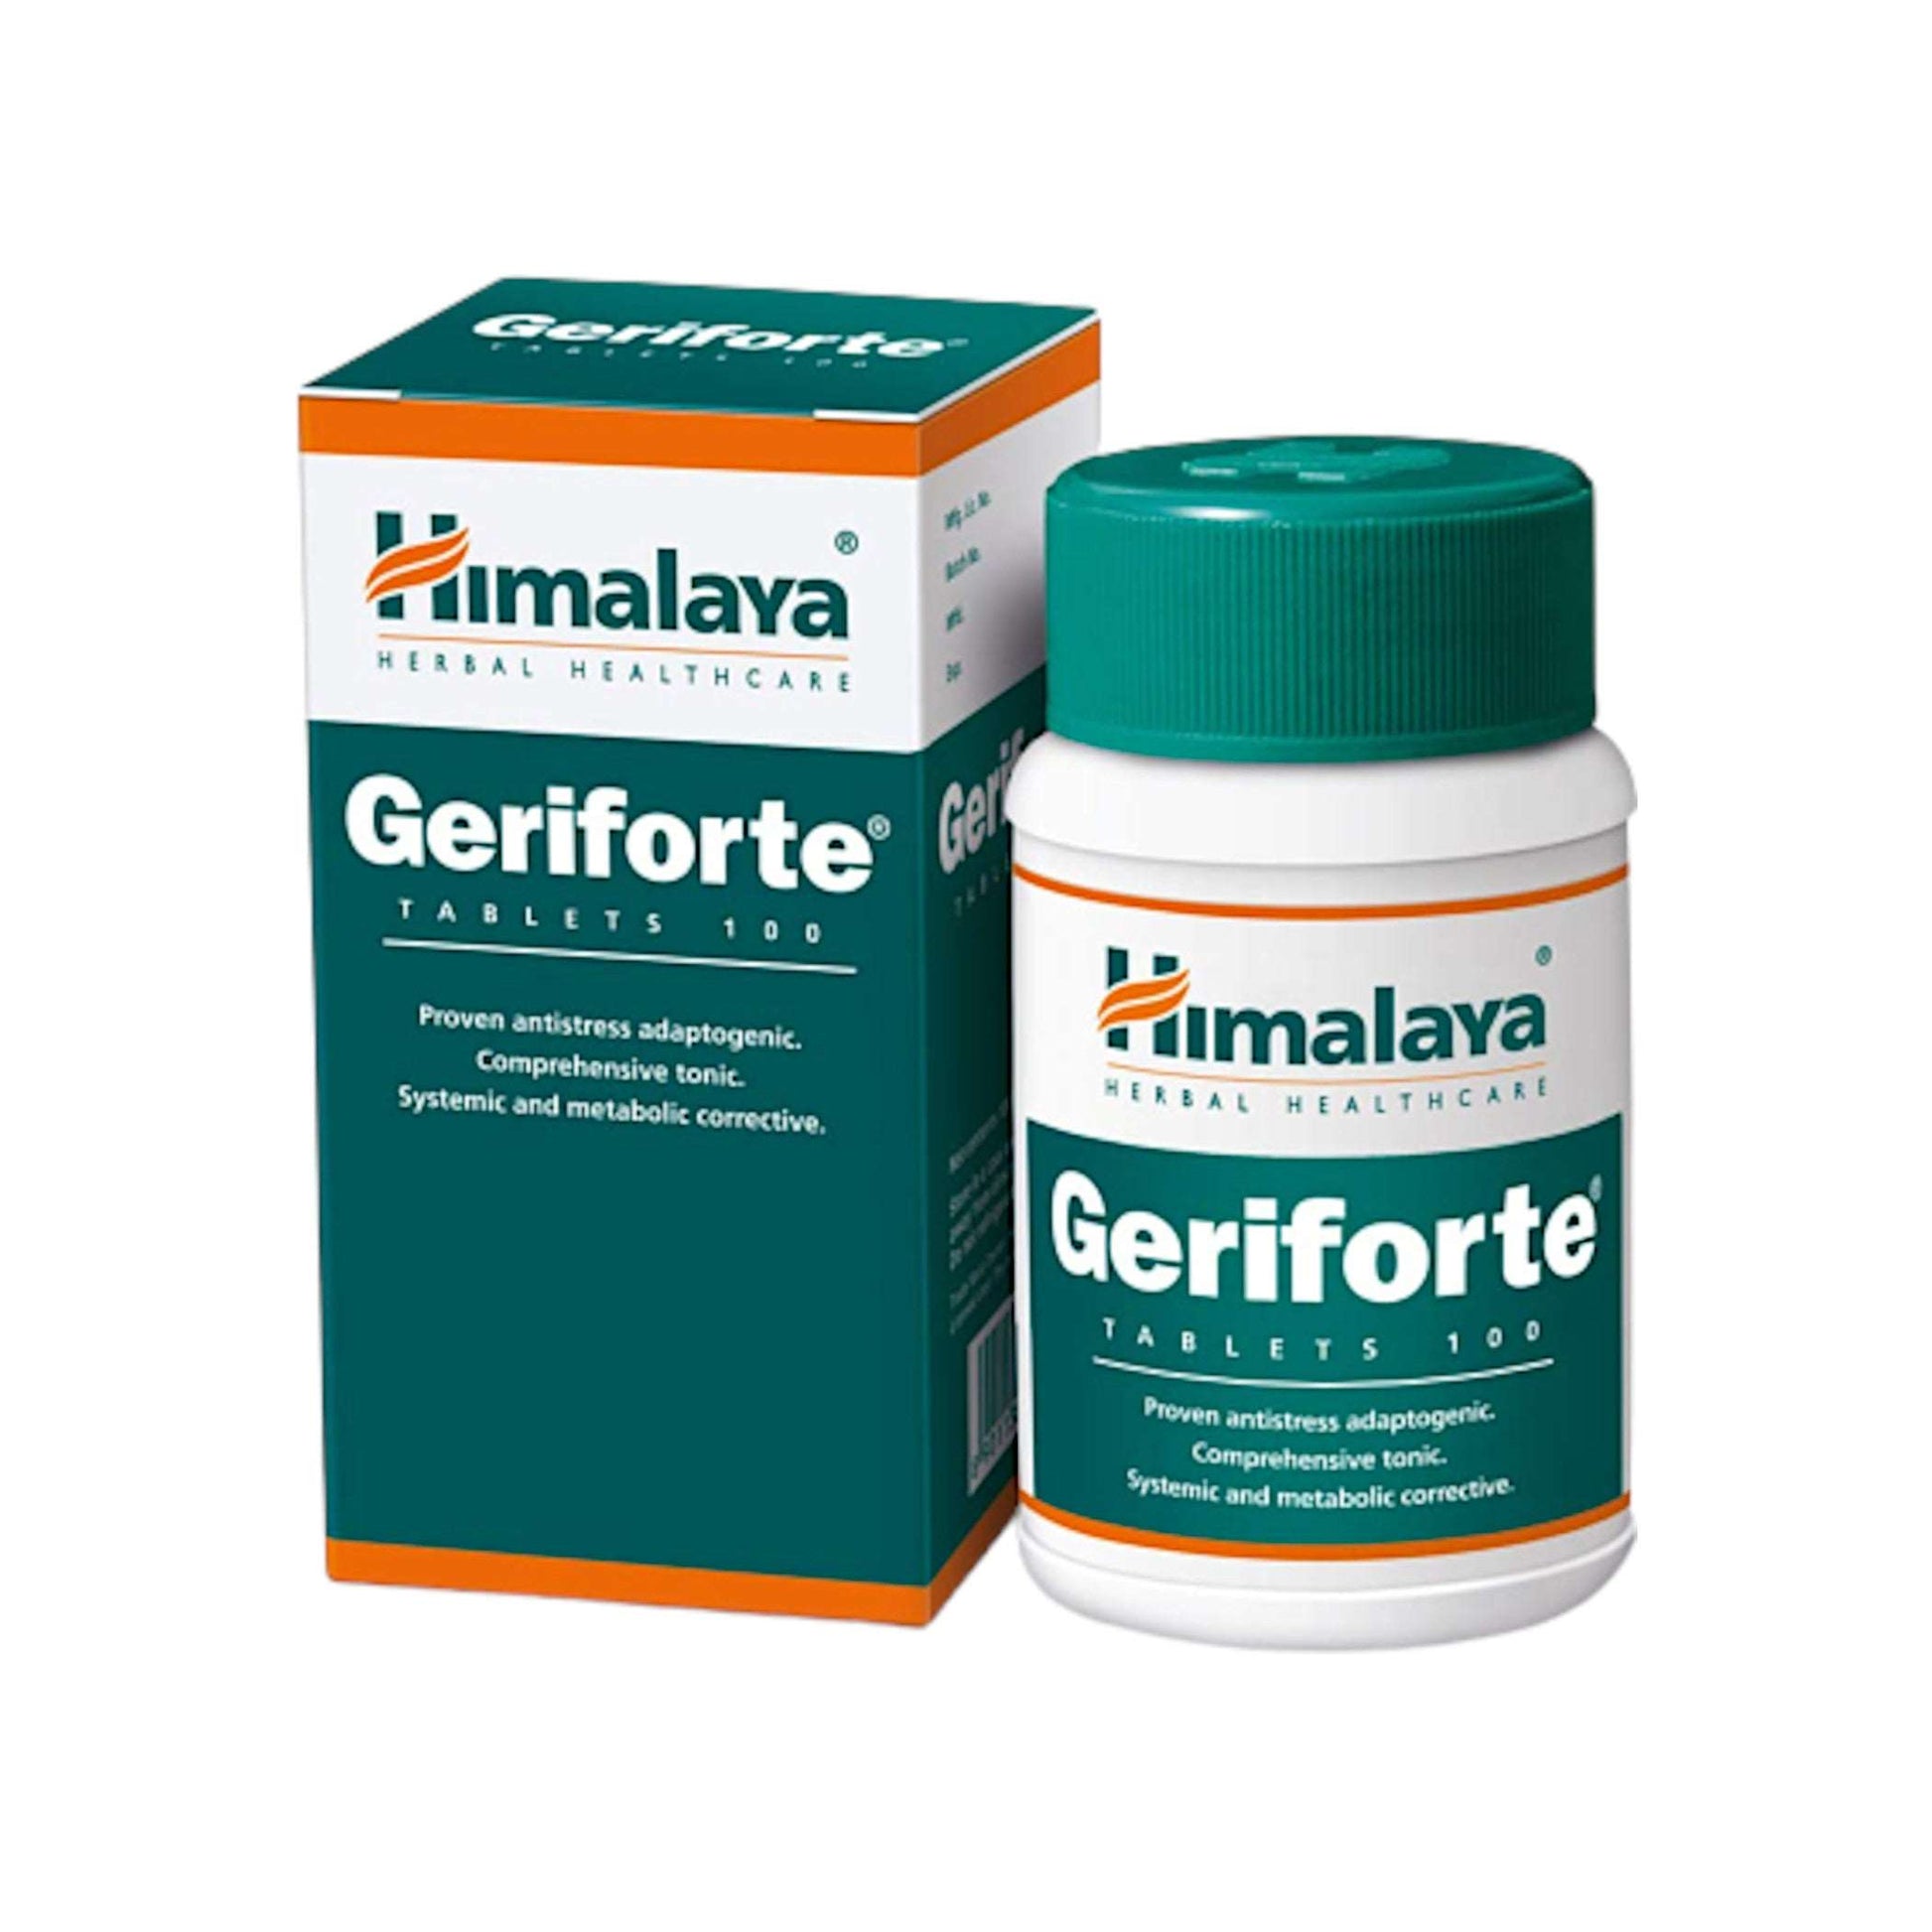 Image: Himalaya Herbals Geriforte 100 Tablets: Natural stress relief and overall wellness support.